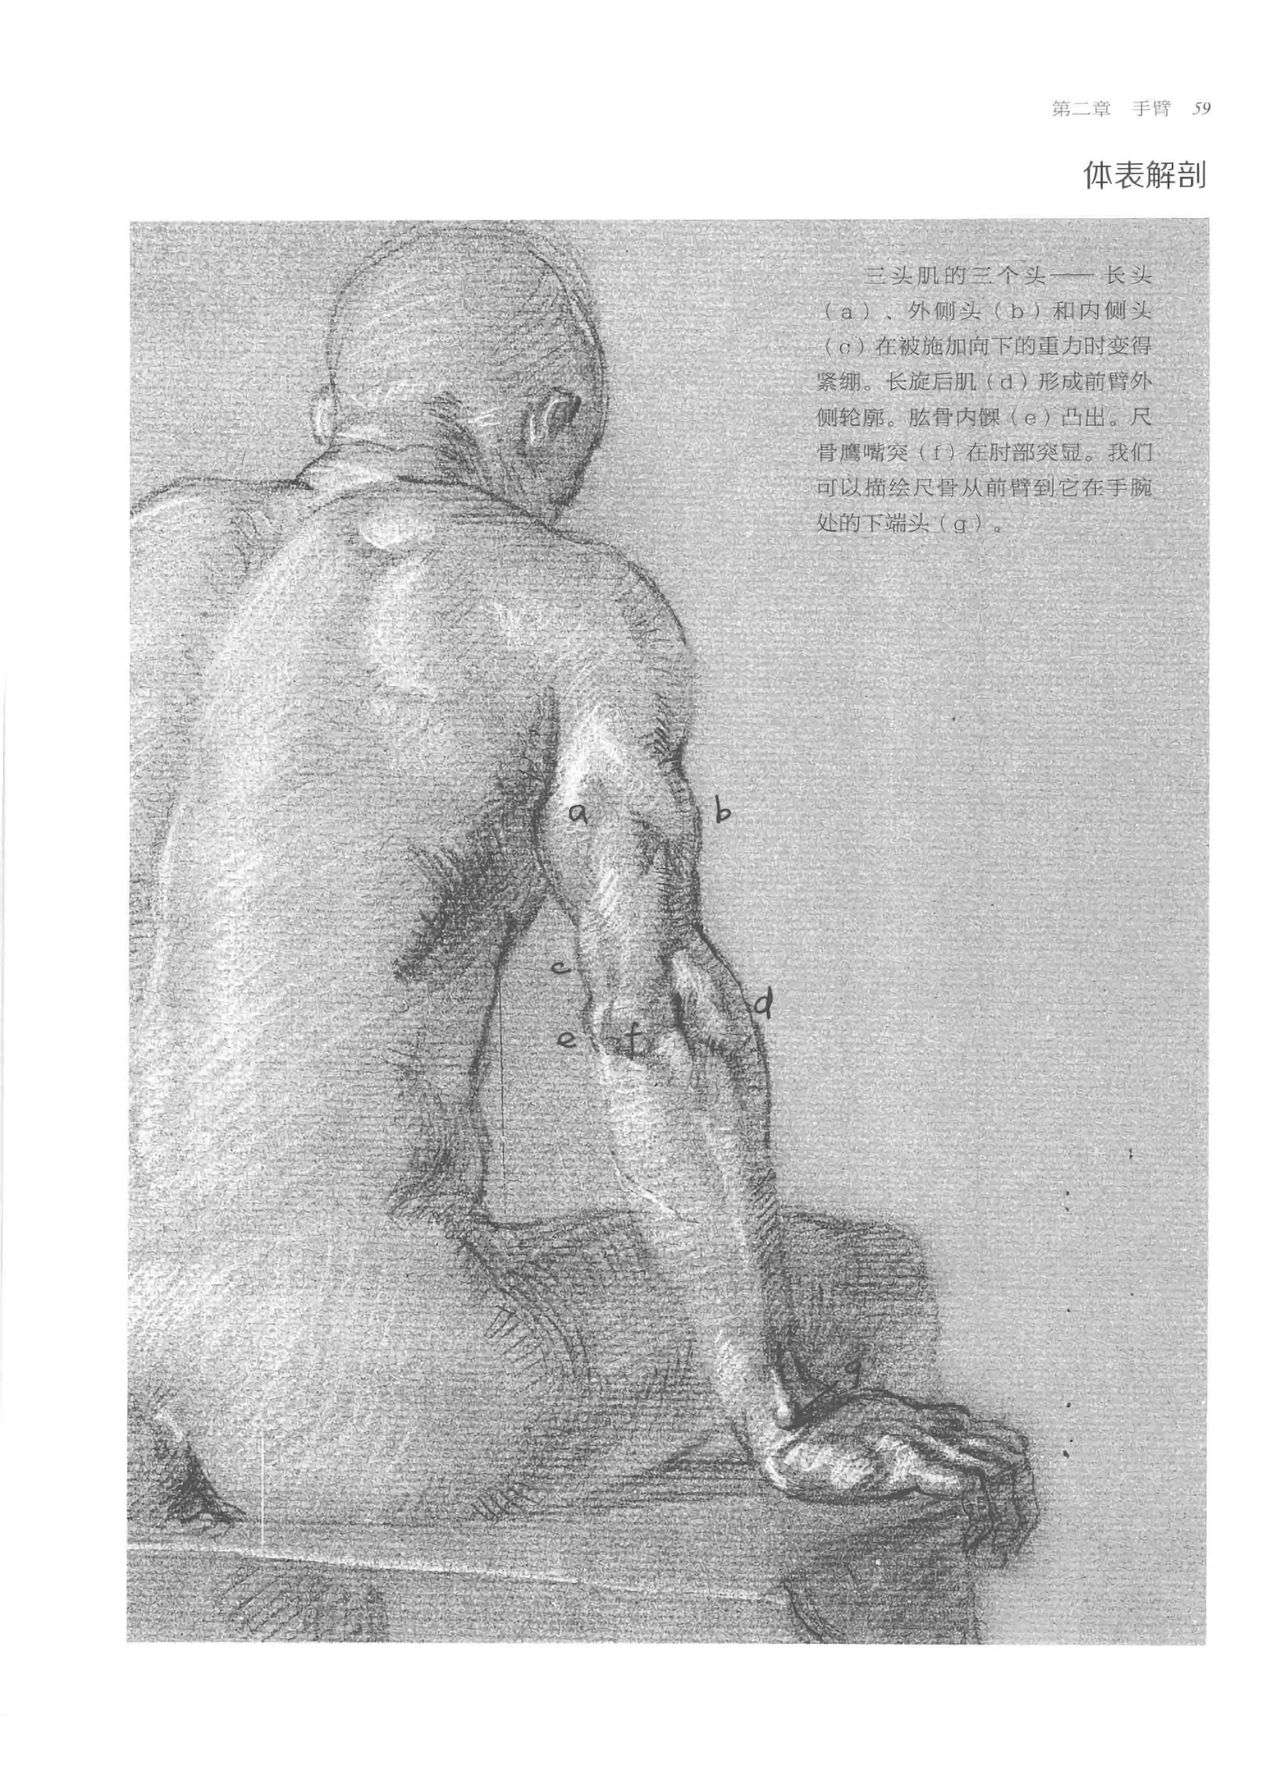 Anatomy-A Complete Guide for Artists - Joseph Sheppard [Chinese] 59